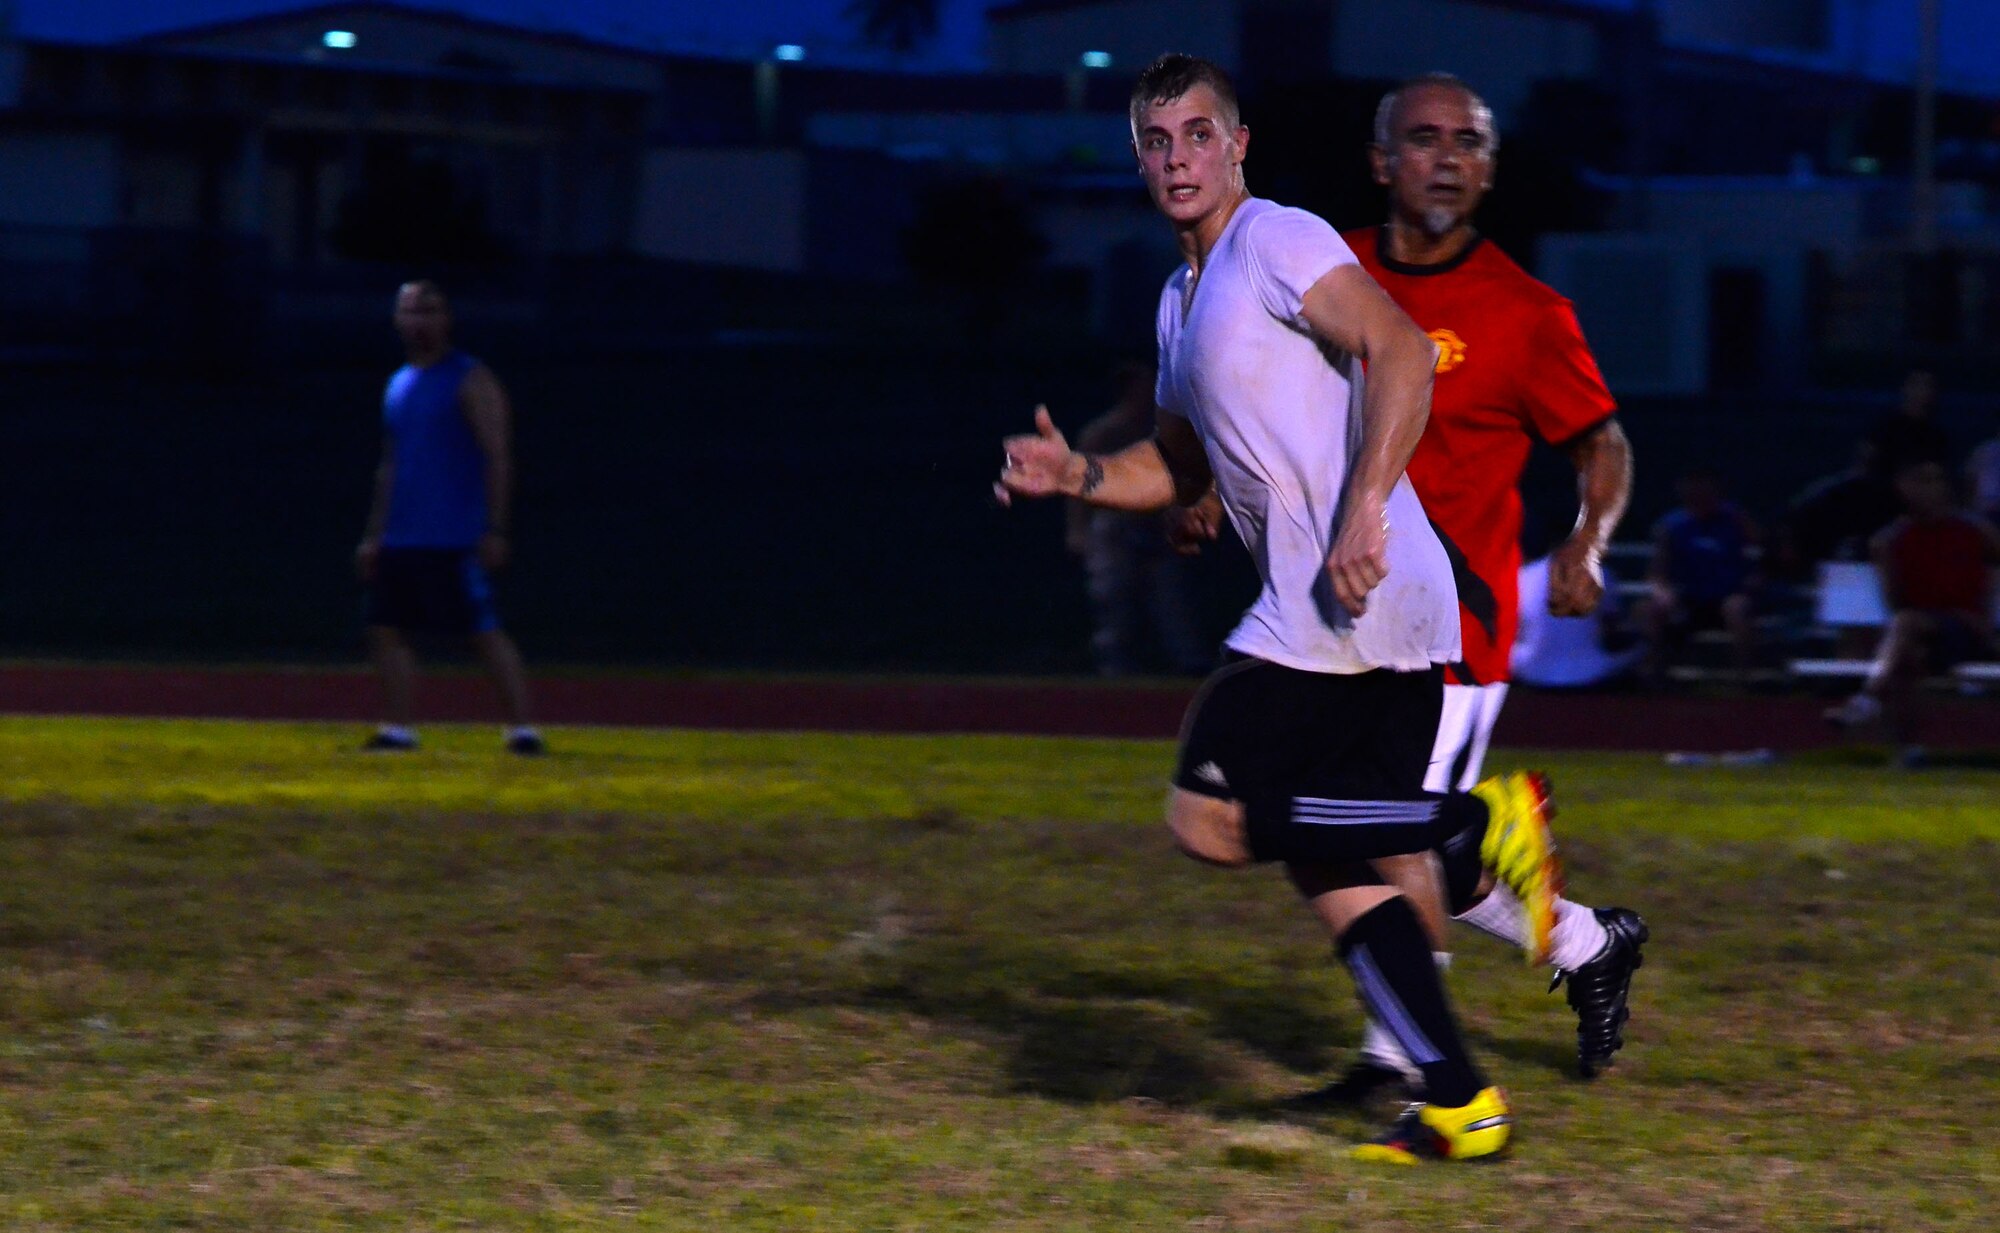 Senior Airman Reid Martinak, 36th Civil Engineer Squadron, runs past a defender from the 36th Medical Group during the intramural soccer championship game on Andersen Air Force Base, Guam, Aug. 26, 2013. The 36th MDG won the game 2-1 and became this year’s soccer champions, finishing the season with an 8:0 win-loss record. (U.S. Air Force photo by Airman 1st Class Mariah Haddenham/Released)